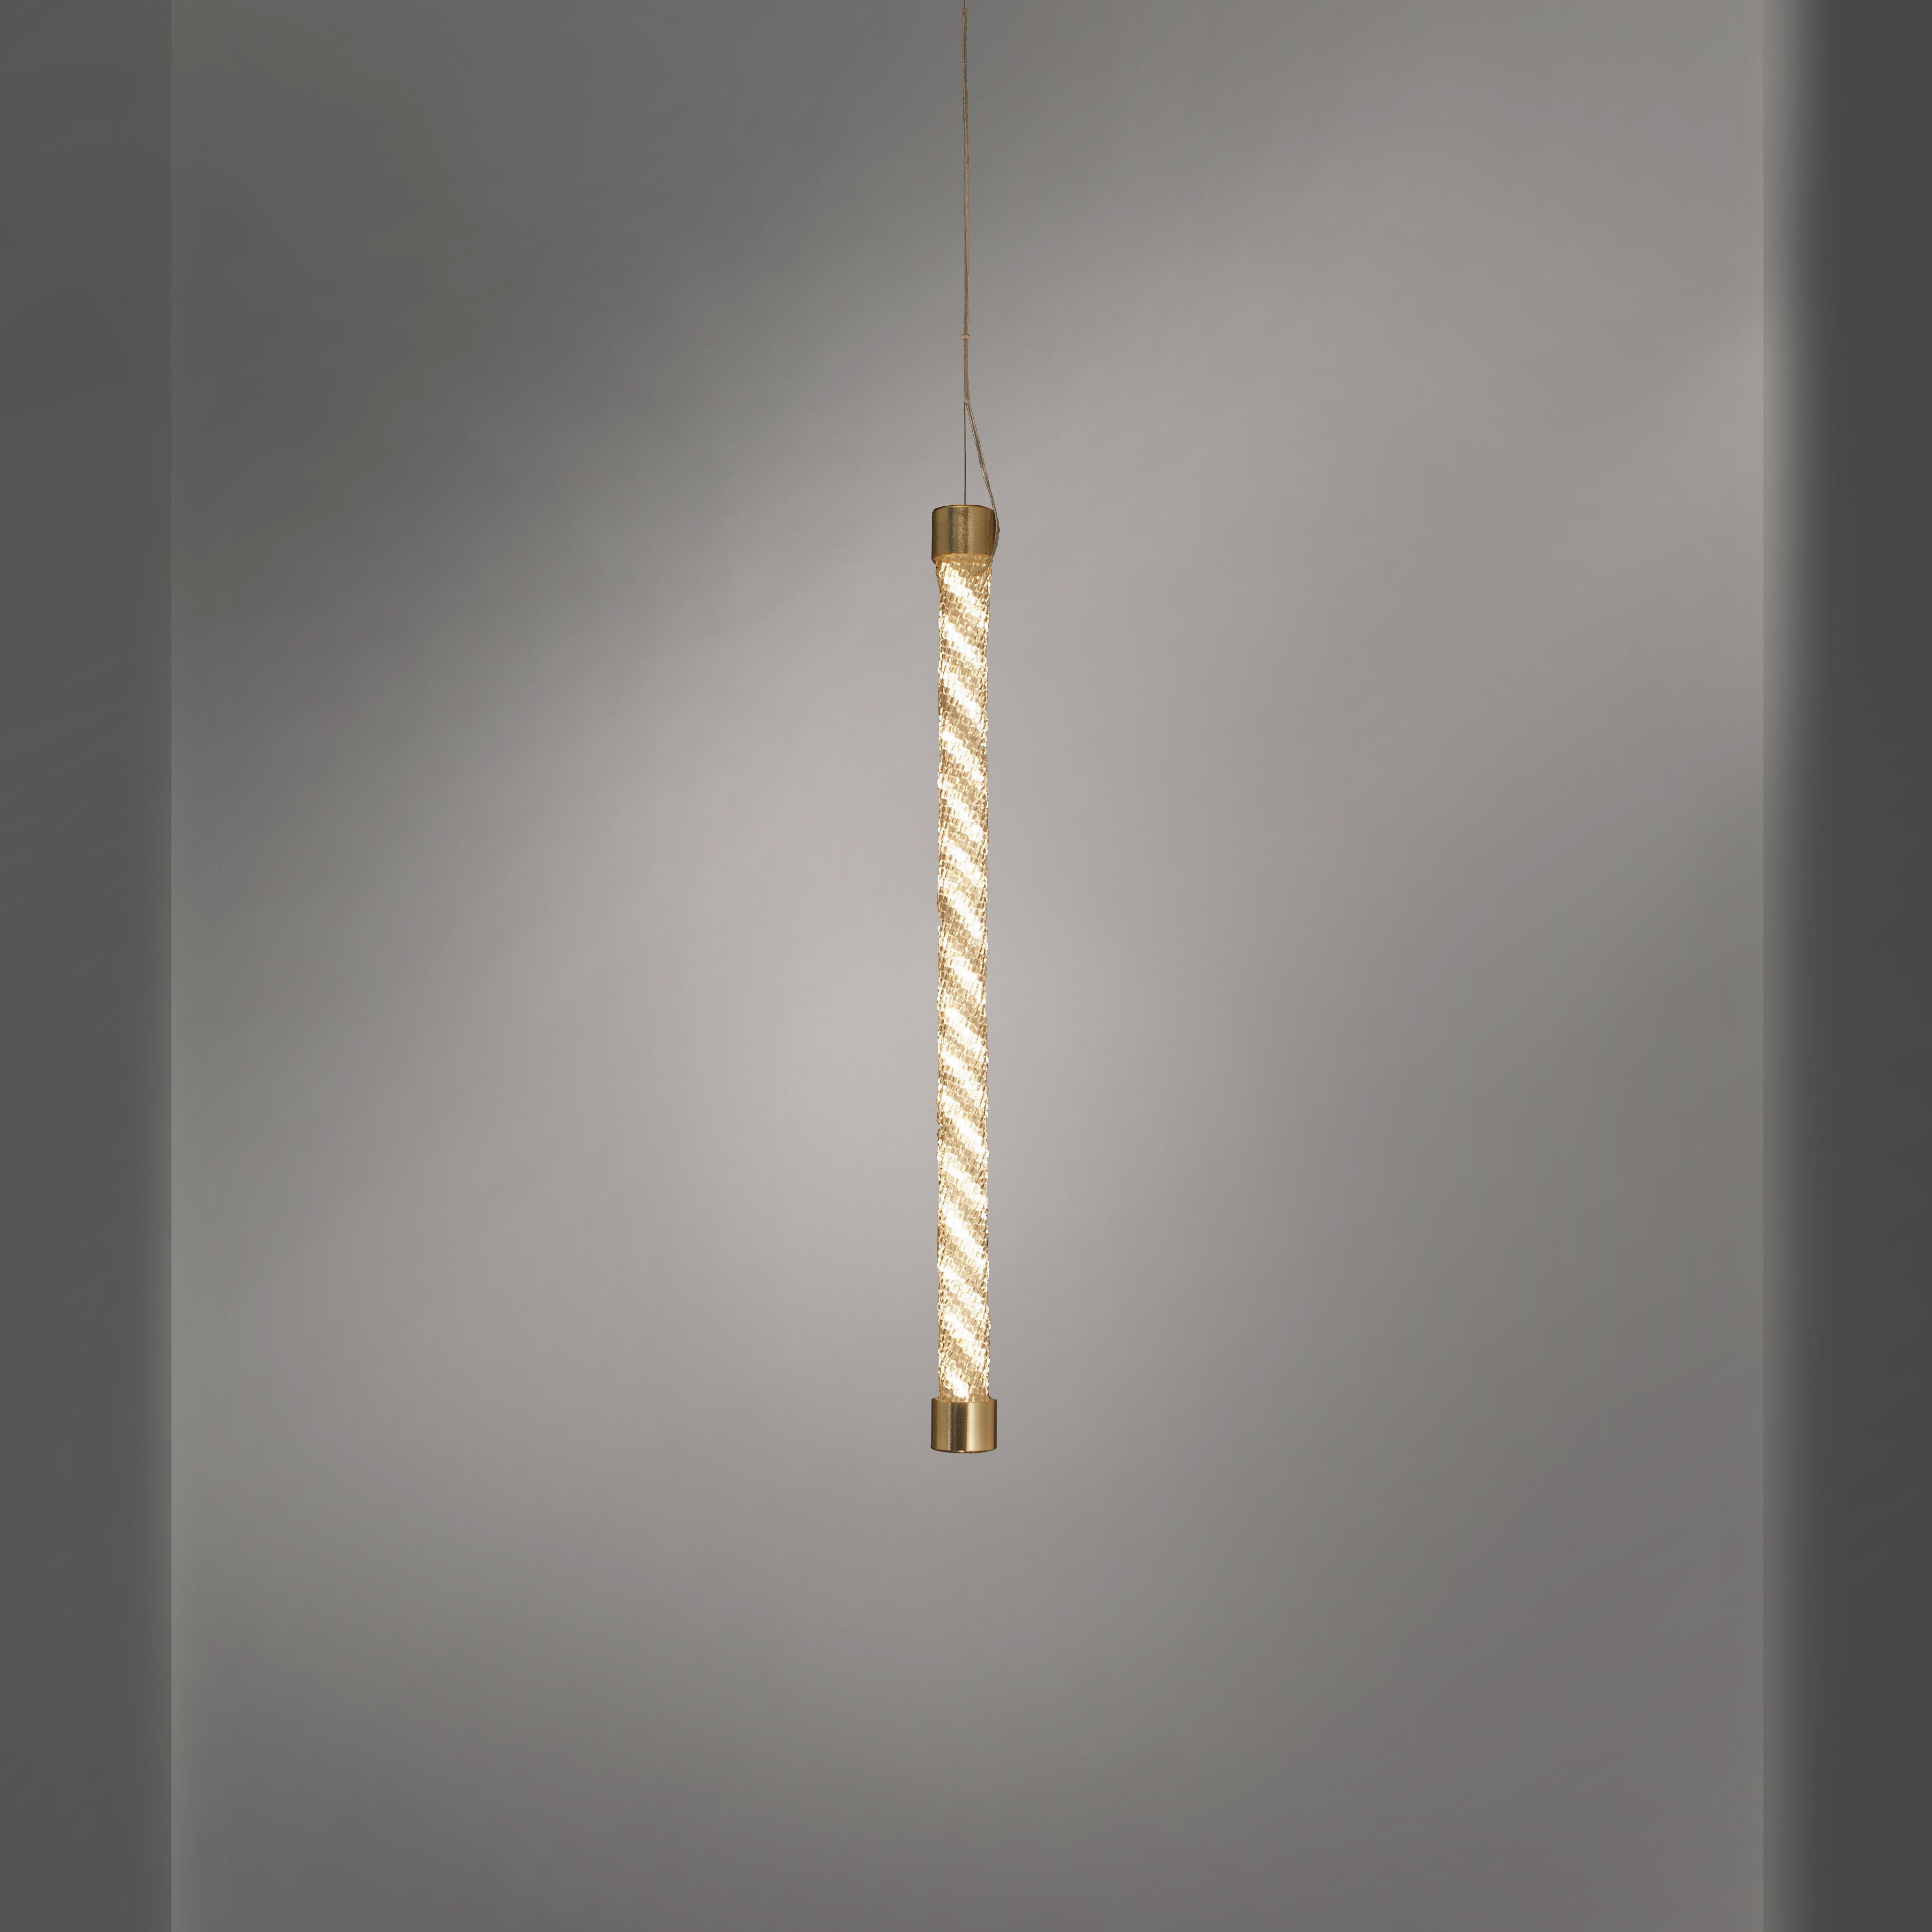 The Mico series explores the concept and experience of pure light, personifying Baroncelli’s commitment to progressive design and exceptional craftsmanship. Available as a ring or baton, the warm and natural LED radiates throughout each framework,